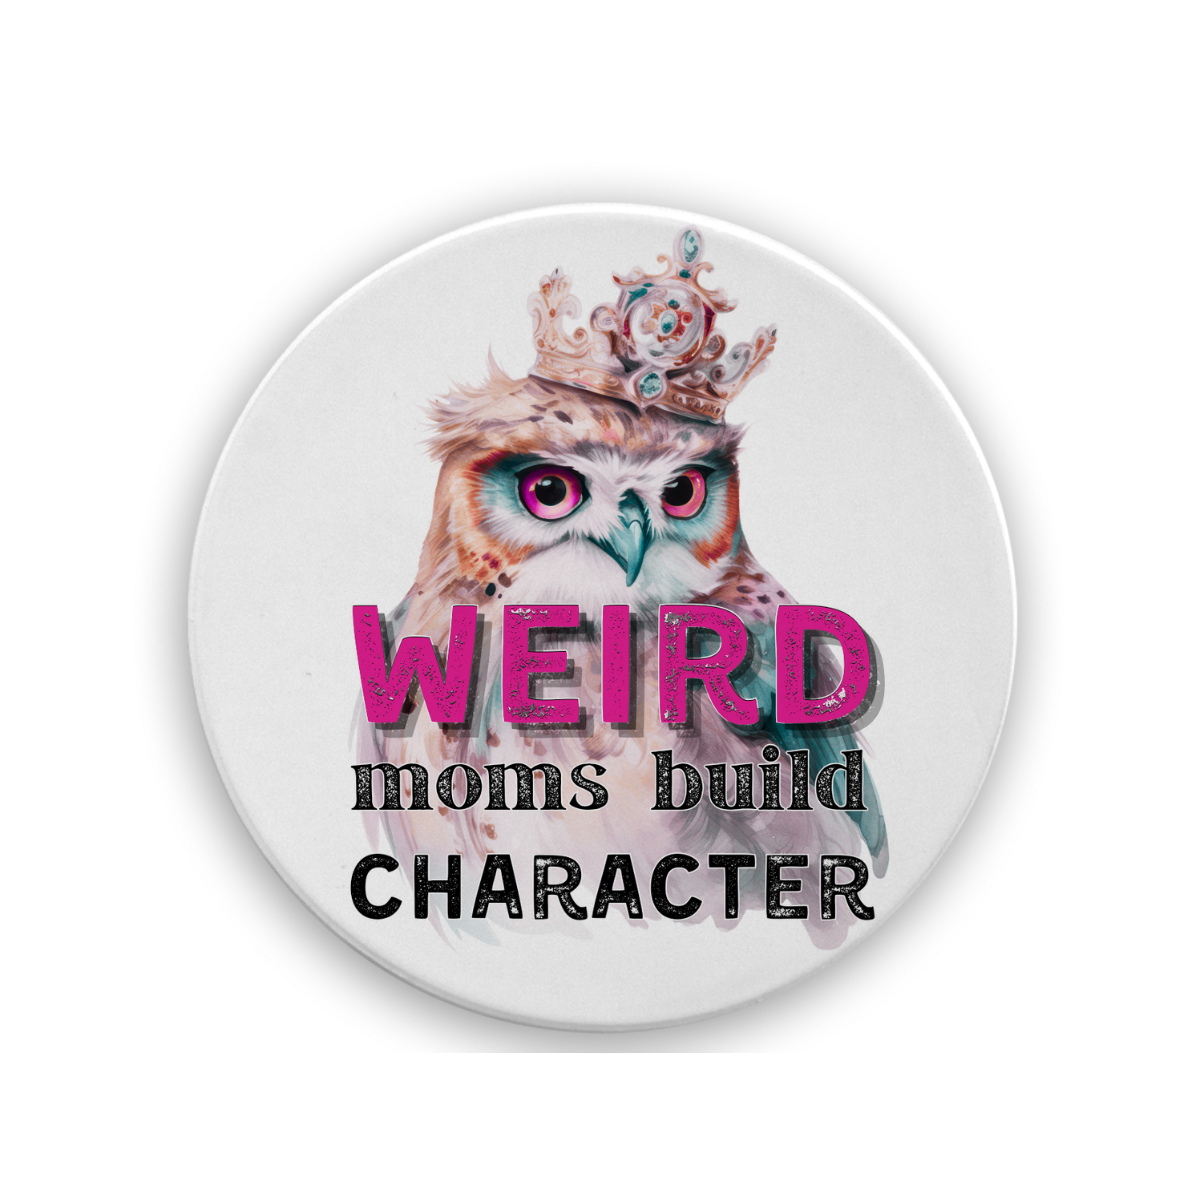 Weird Mom's Build Character | Drink Coaster - The Pretty Things.ca